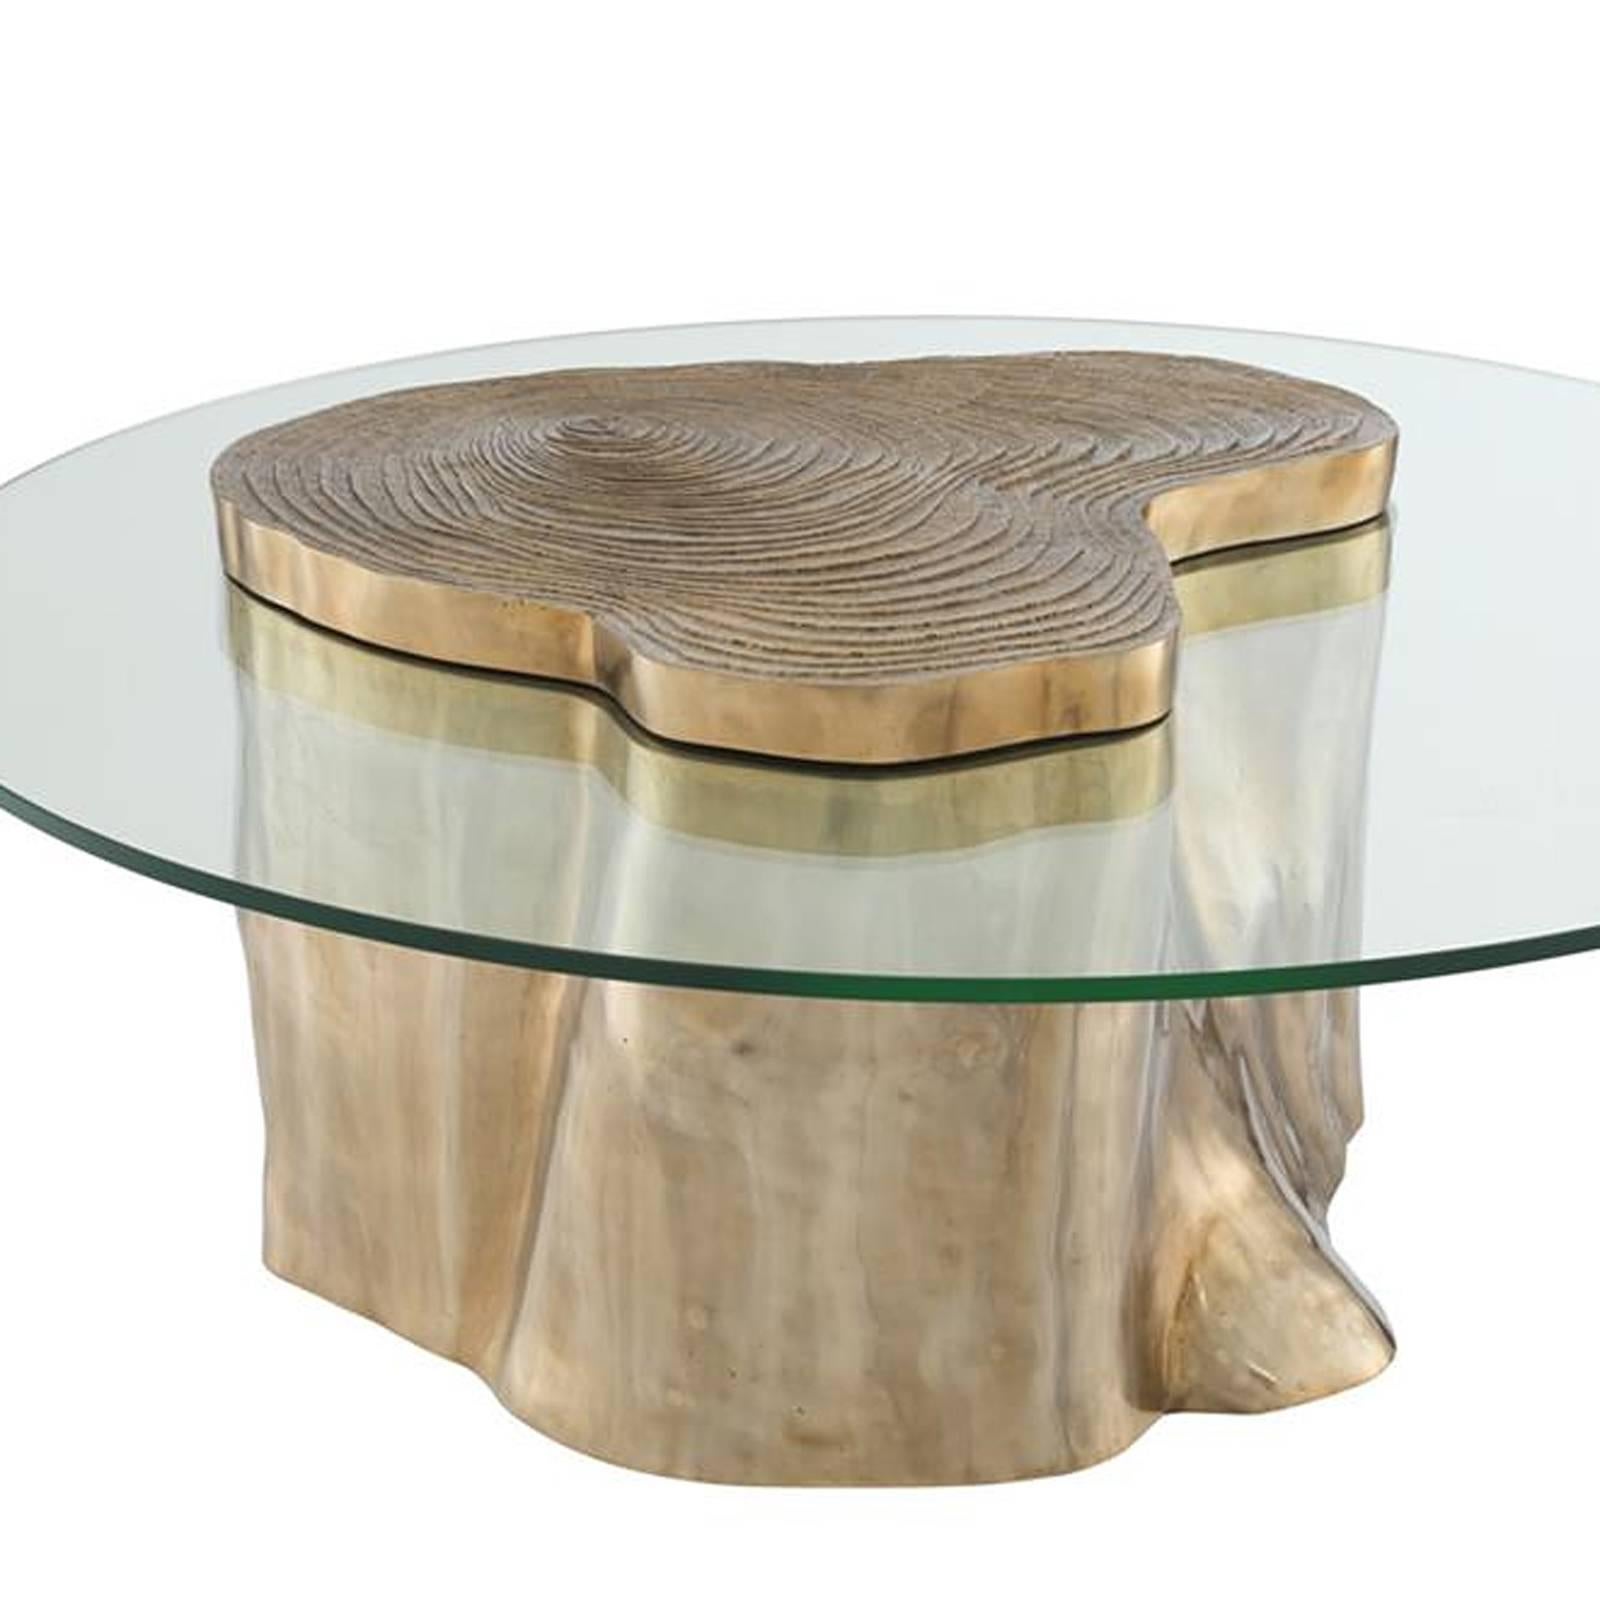 Indonesian Solid Trunk Coffee Table in Solid Polished Brass Finish